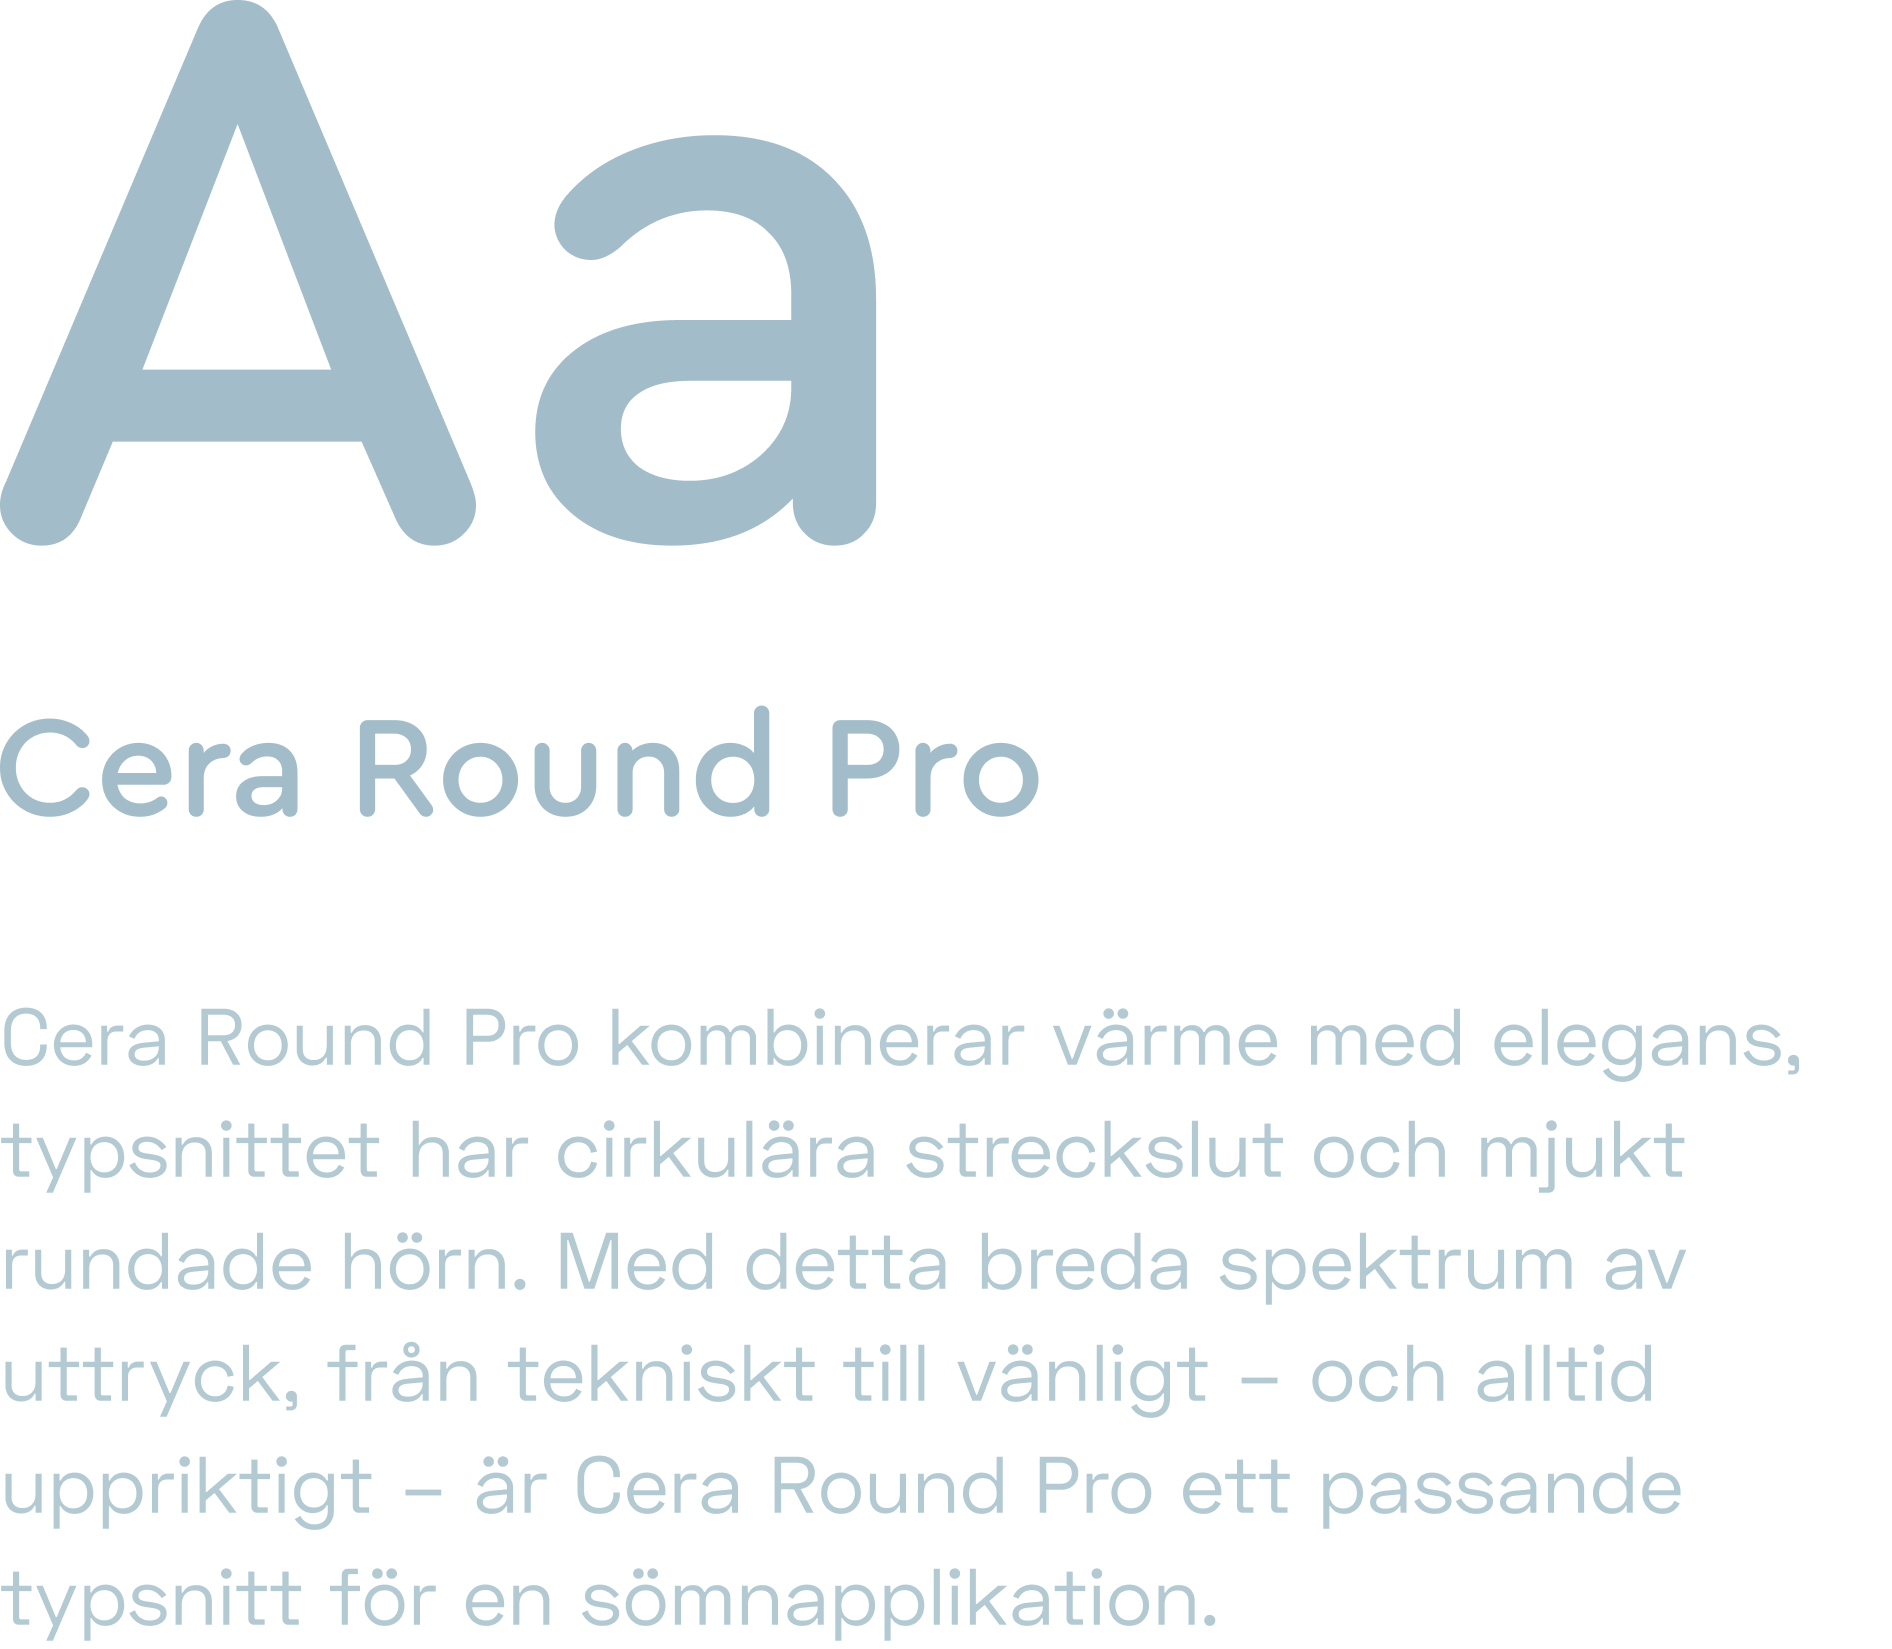 example fonts of the Cera Round Pro typface